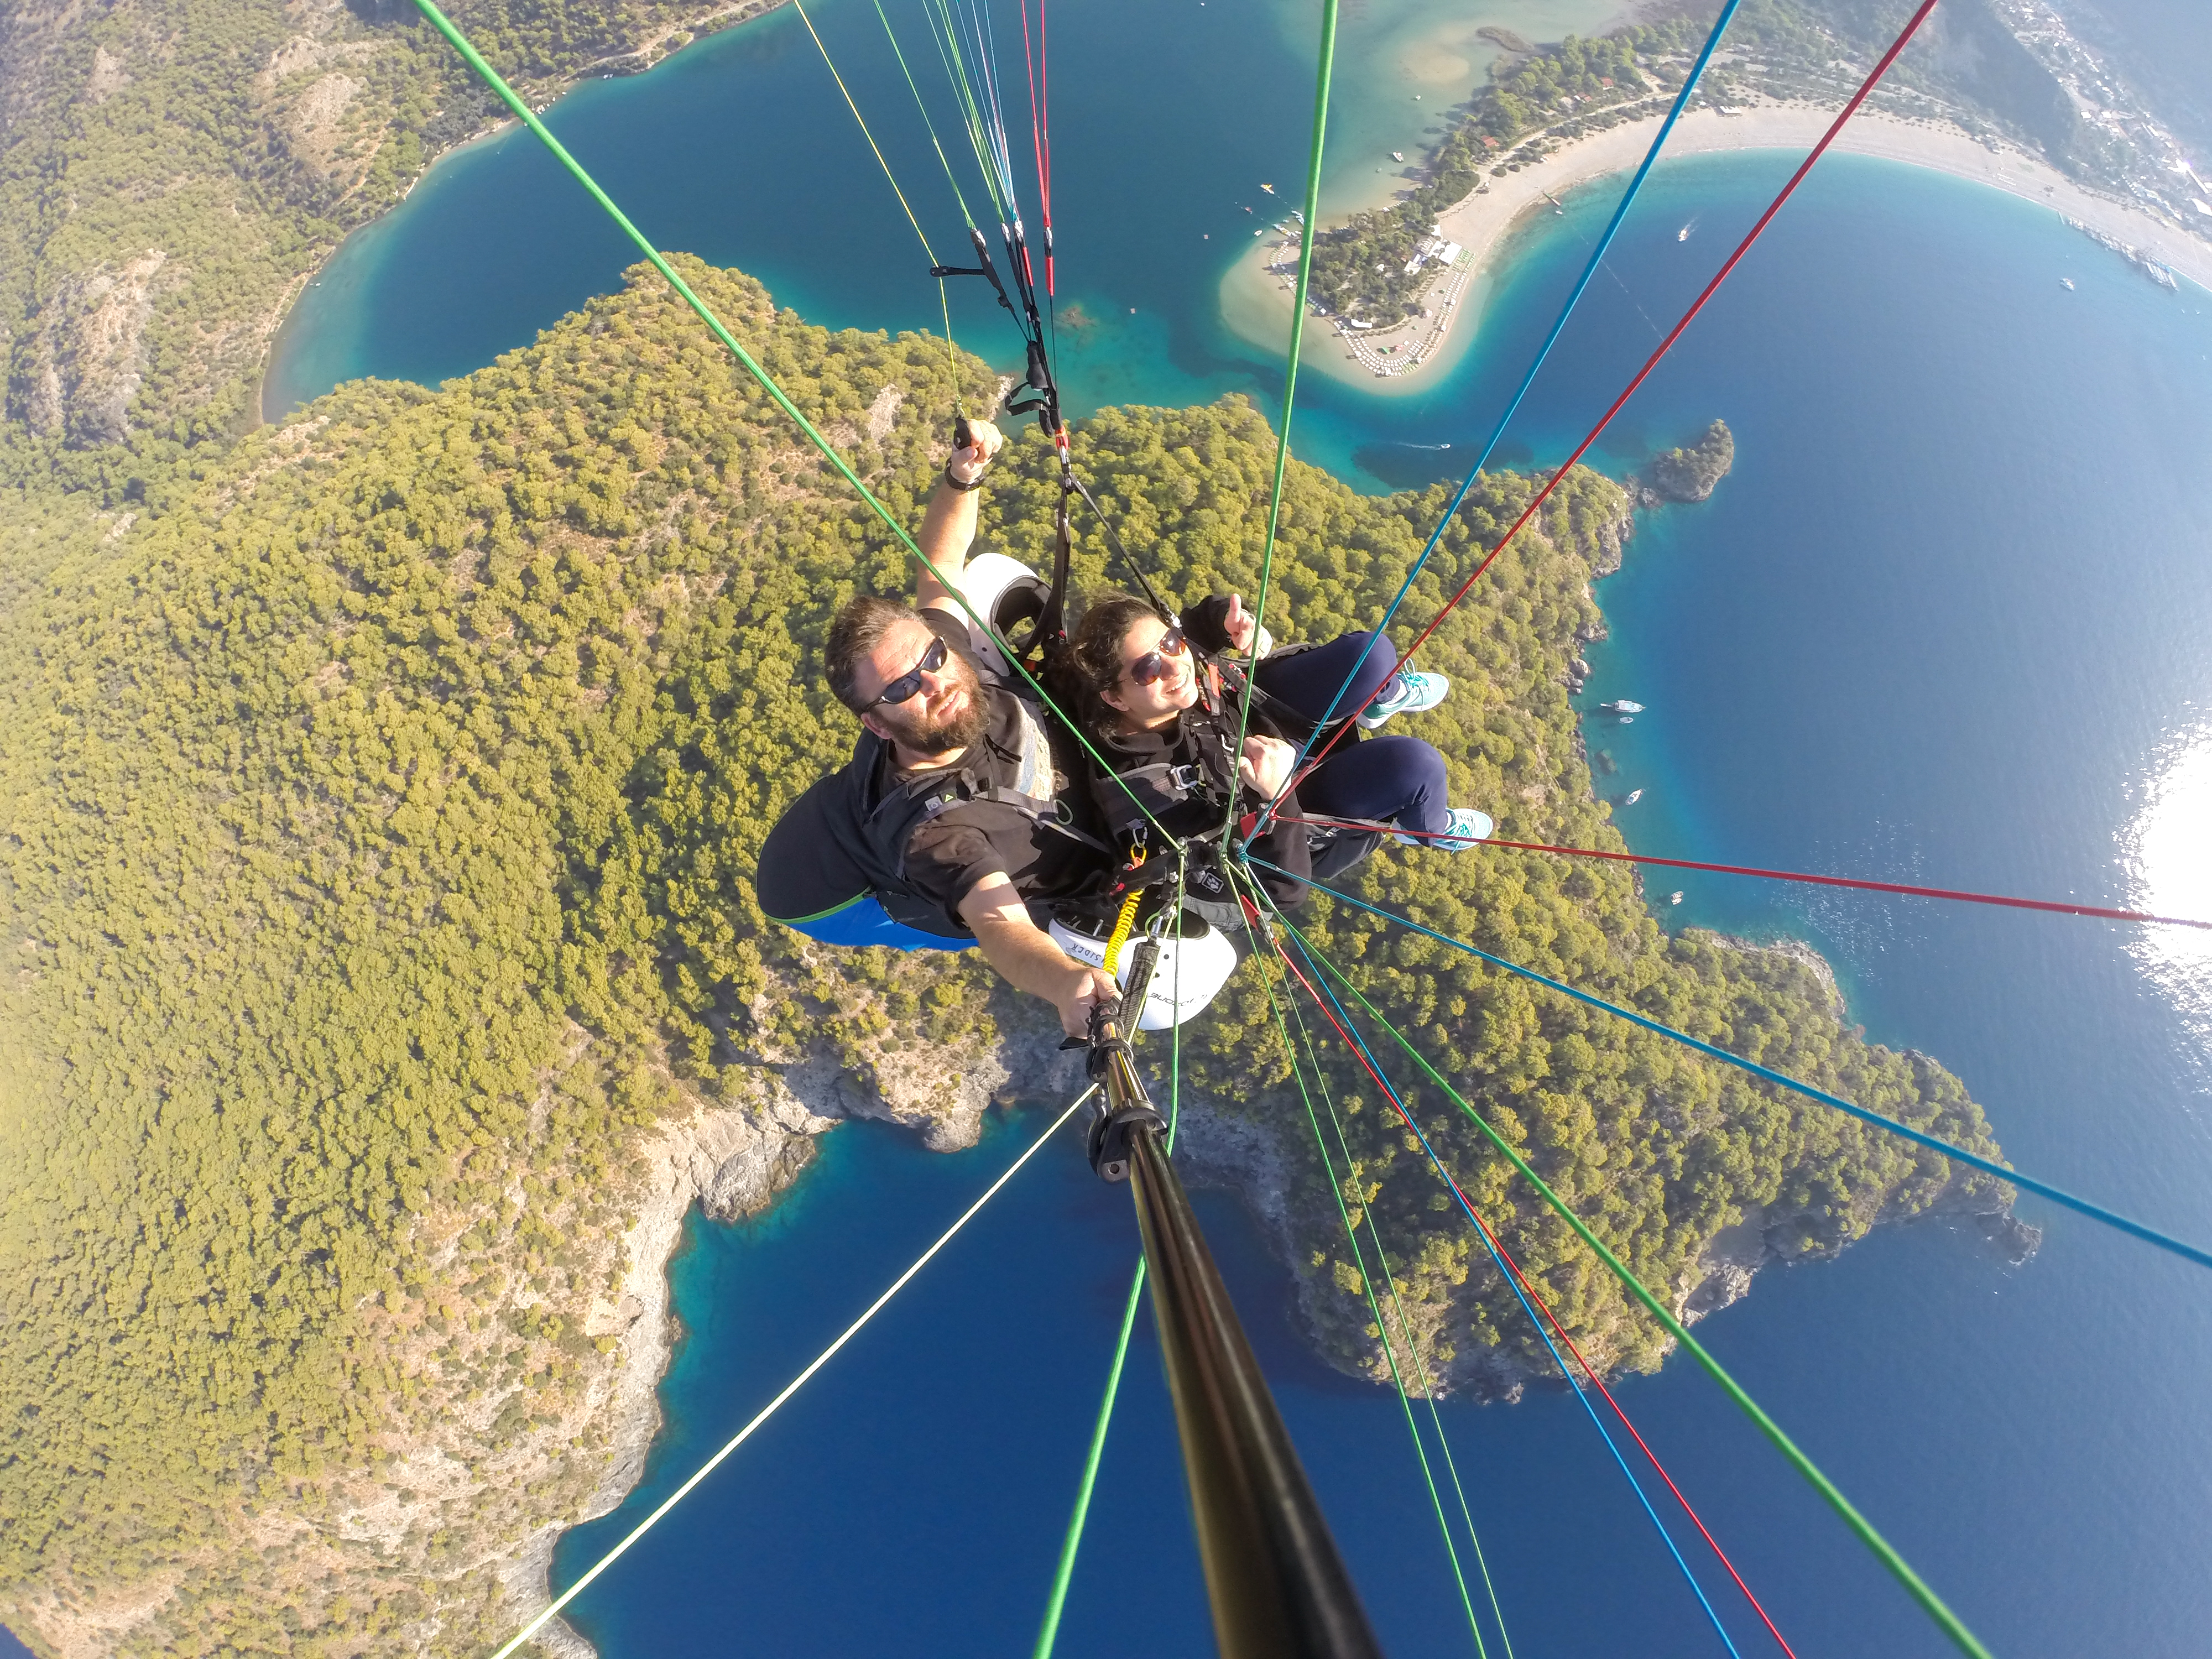 paragliding cost paragliding price skydiving antalya price of paragliding skydiving in turkey best paragliding fatiha turkey cheap flights to oludeniz turkey difference between parachuting and paragliding ölüdeniz türkiye oludeniz in turkey go paragliding